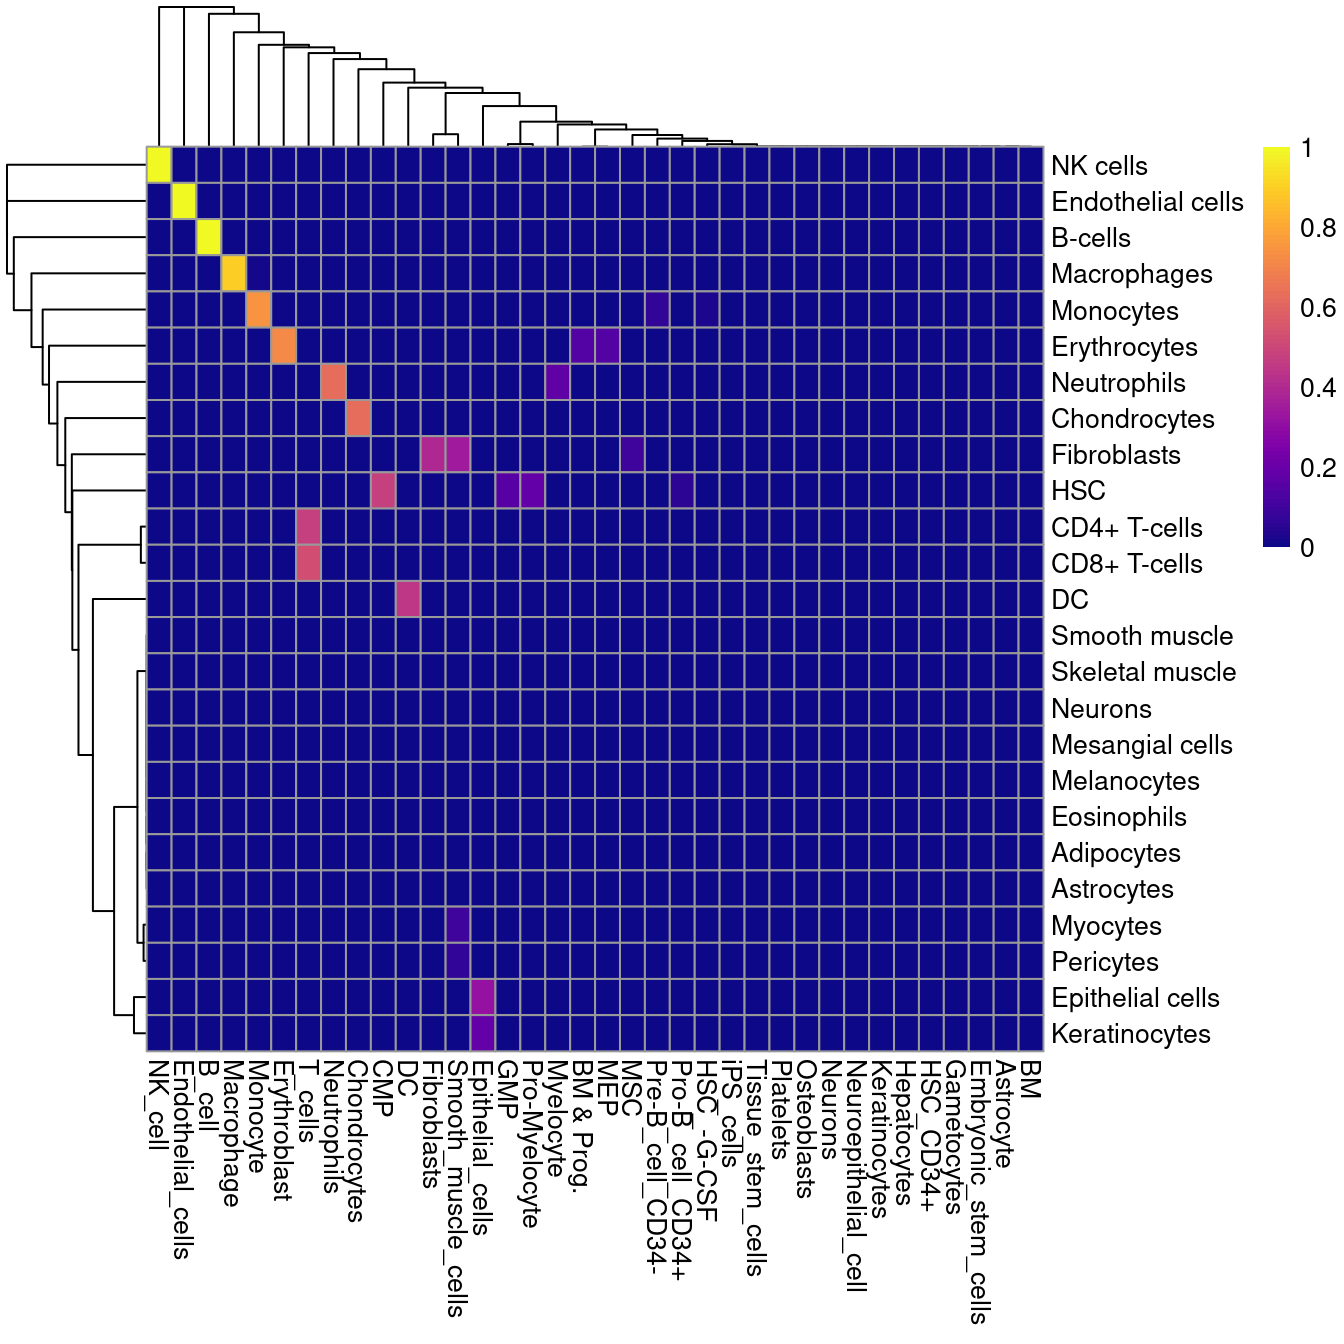 Heatmap of mutual assignment probabilities between the Blueprint/ENCODE reference dataset (labels in rows) and the Human primary cell atlas reference (labels in columns).